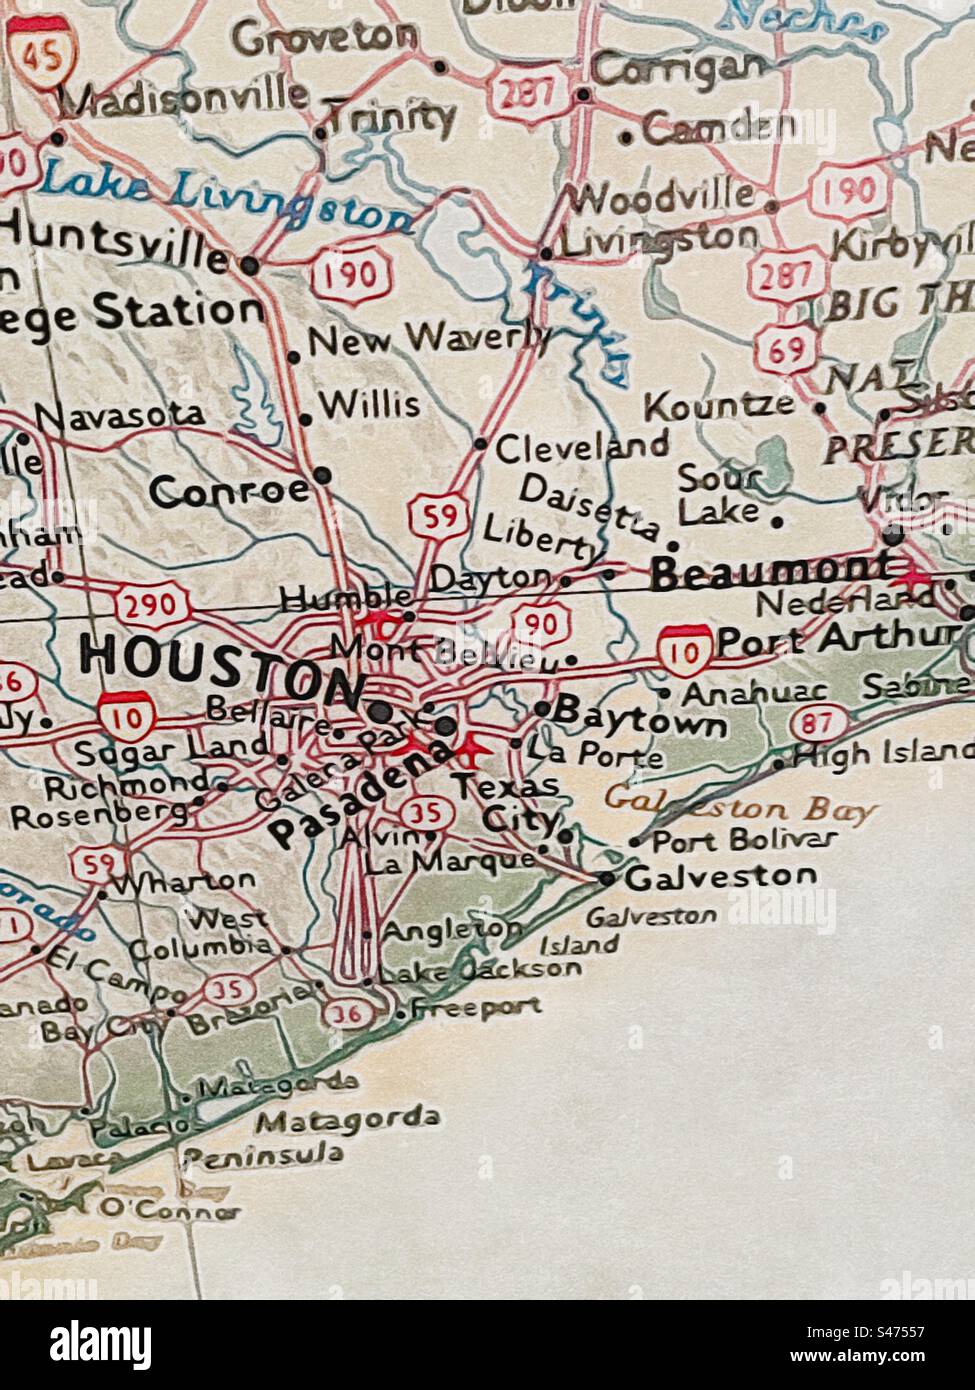 Zoomed image of the Houston, Texas area on a US map. Original photo has been made into an “illustration” via the IOS app Brushstroke. Stock Photo